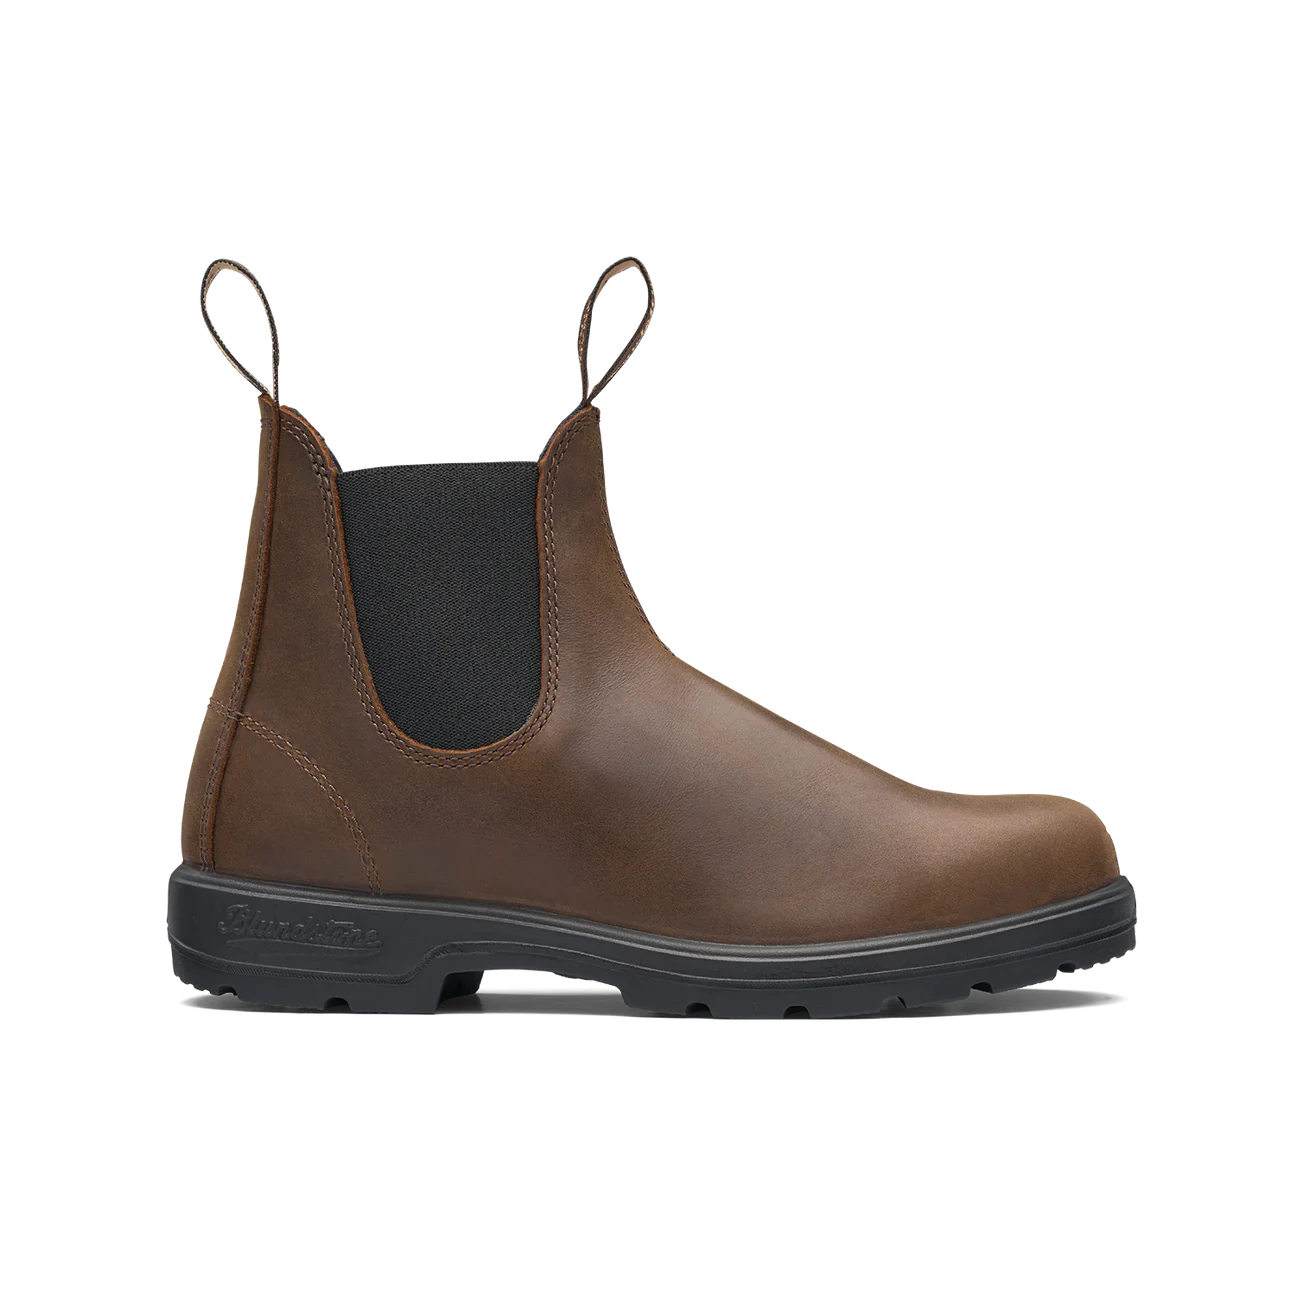 Blundstone Classic Antique Brown Boot, 1609